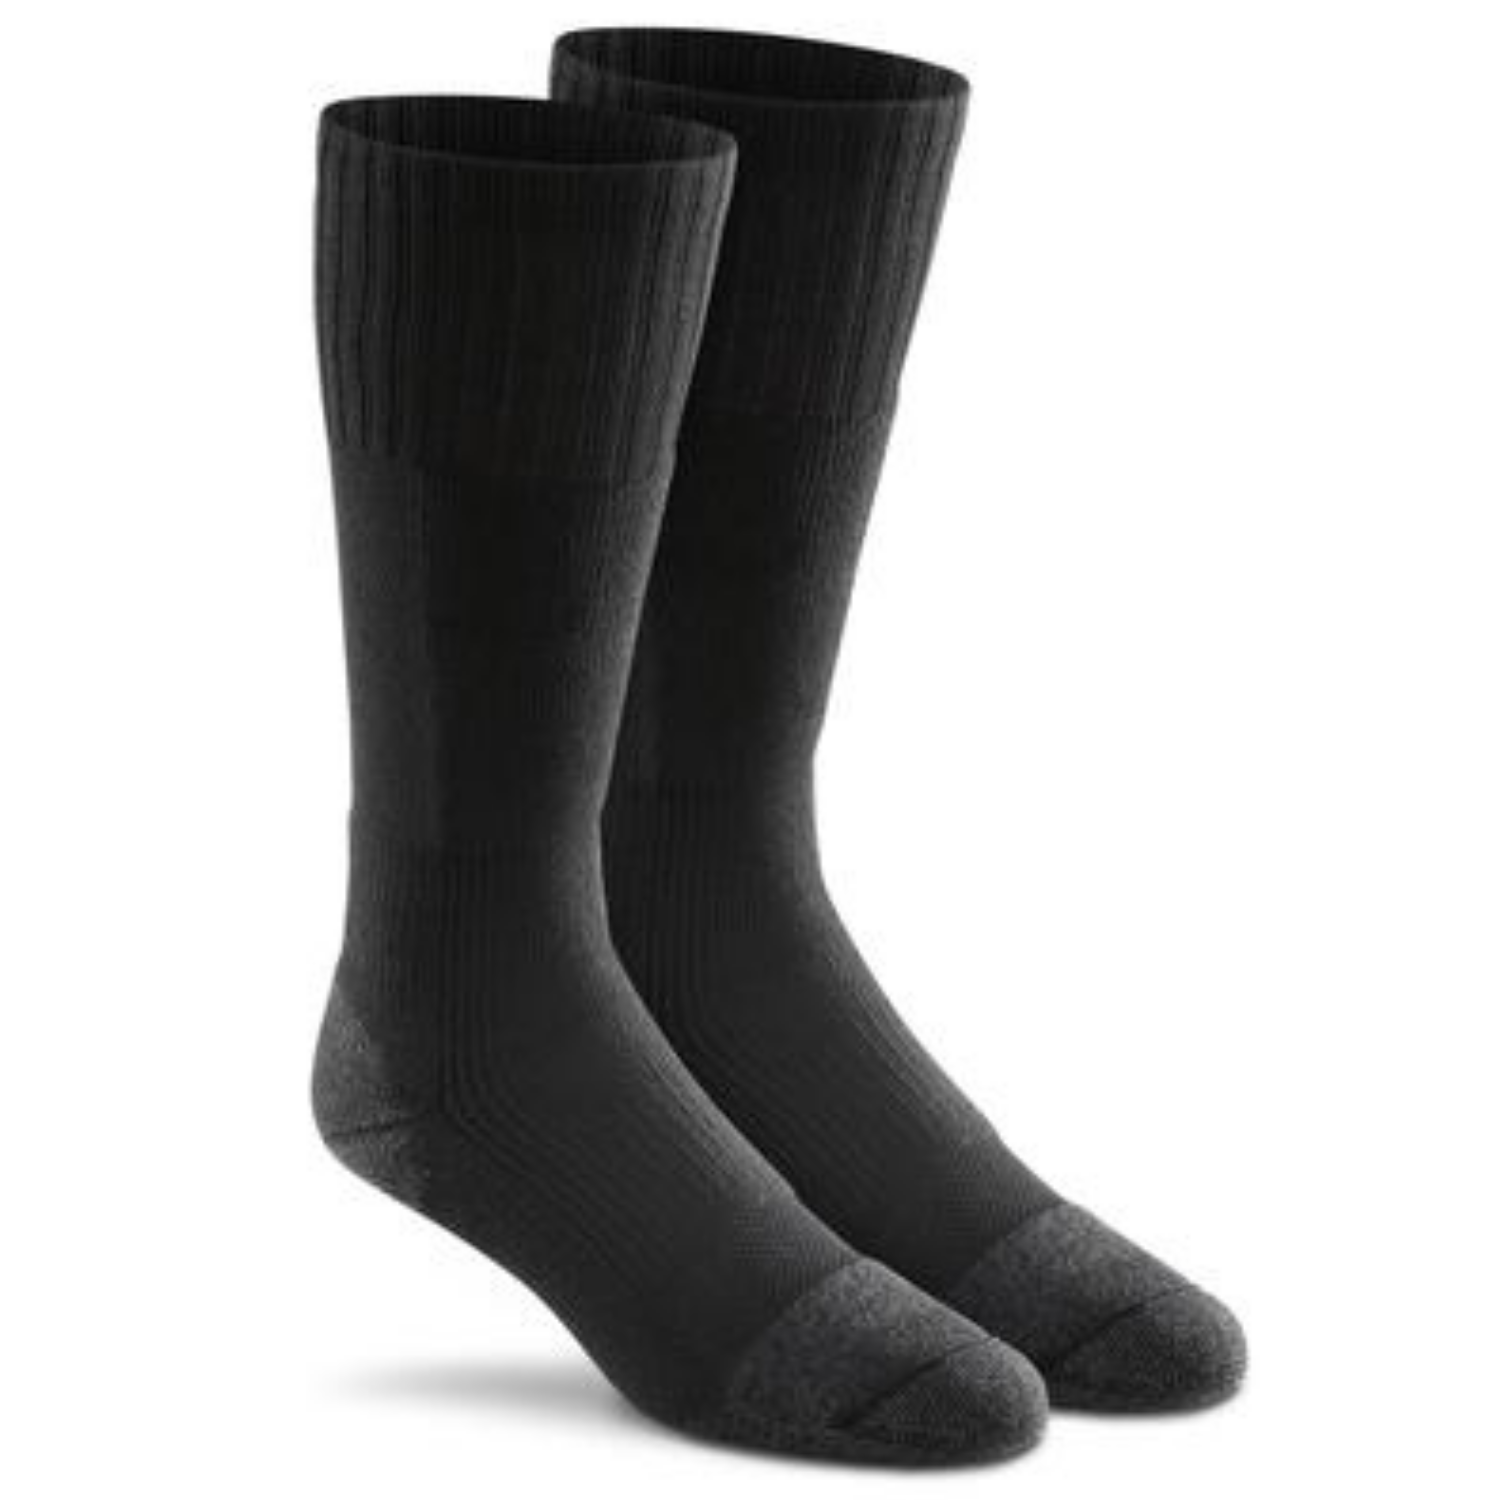  vacsAX Mid Calf Socks for Men and Women - gym socks Fashionable  Sock Head Design Moisture-Wicking Black and White Fish : Clothing, Shoes &  Jewelry